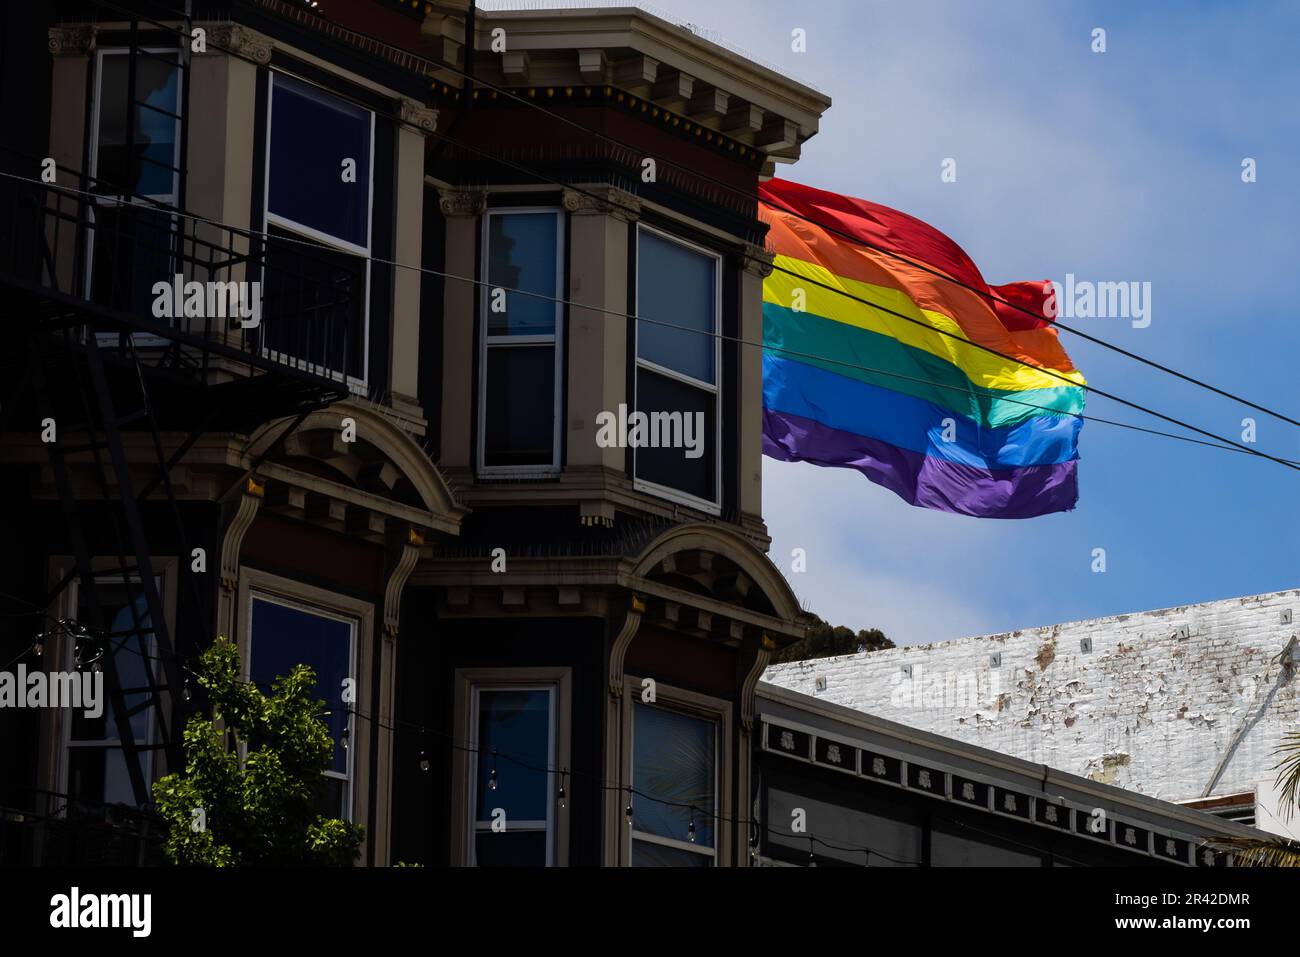 A stunning, multi-colored building stands proudly in the urban area with its rainbow flag flying high against a bright blue sky. The Castro District, Stock Photo